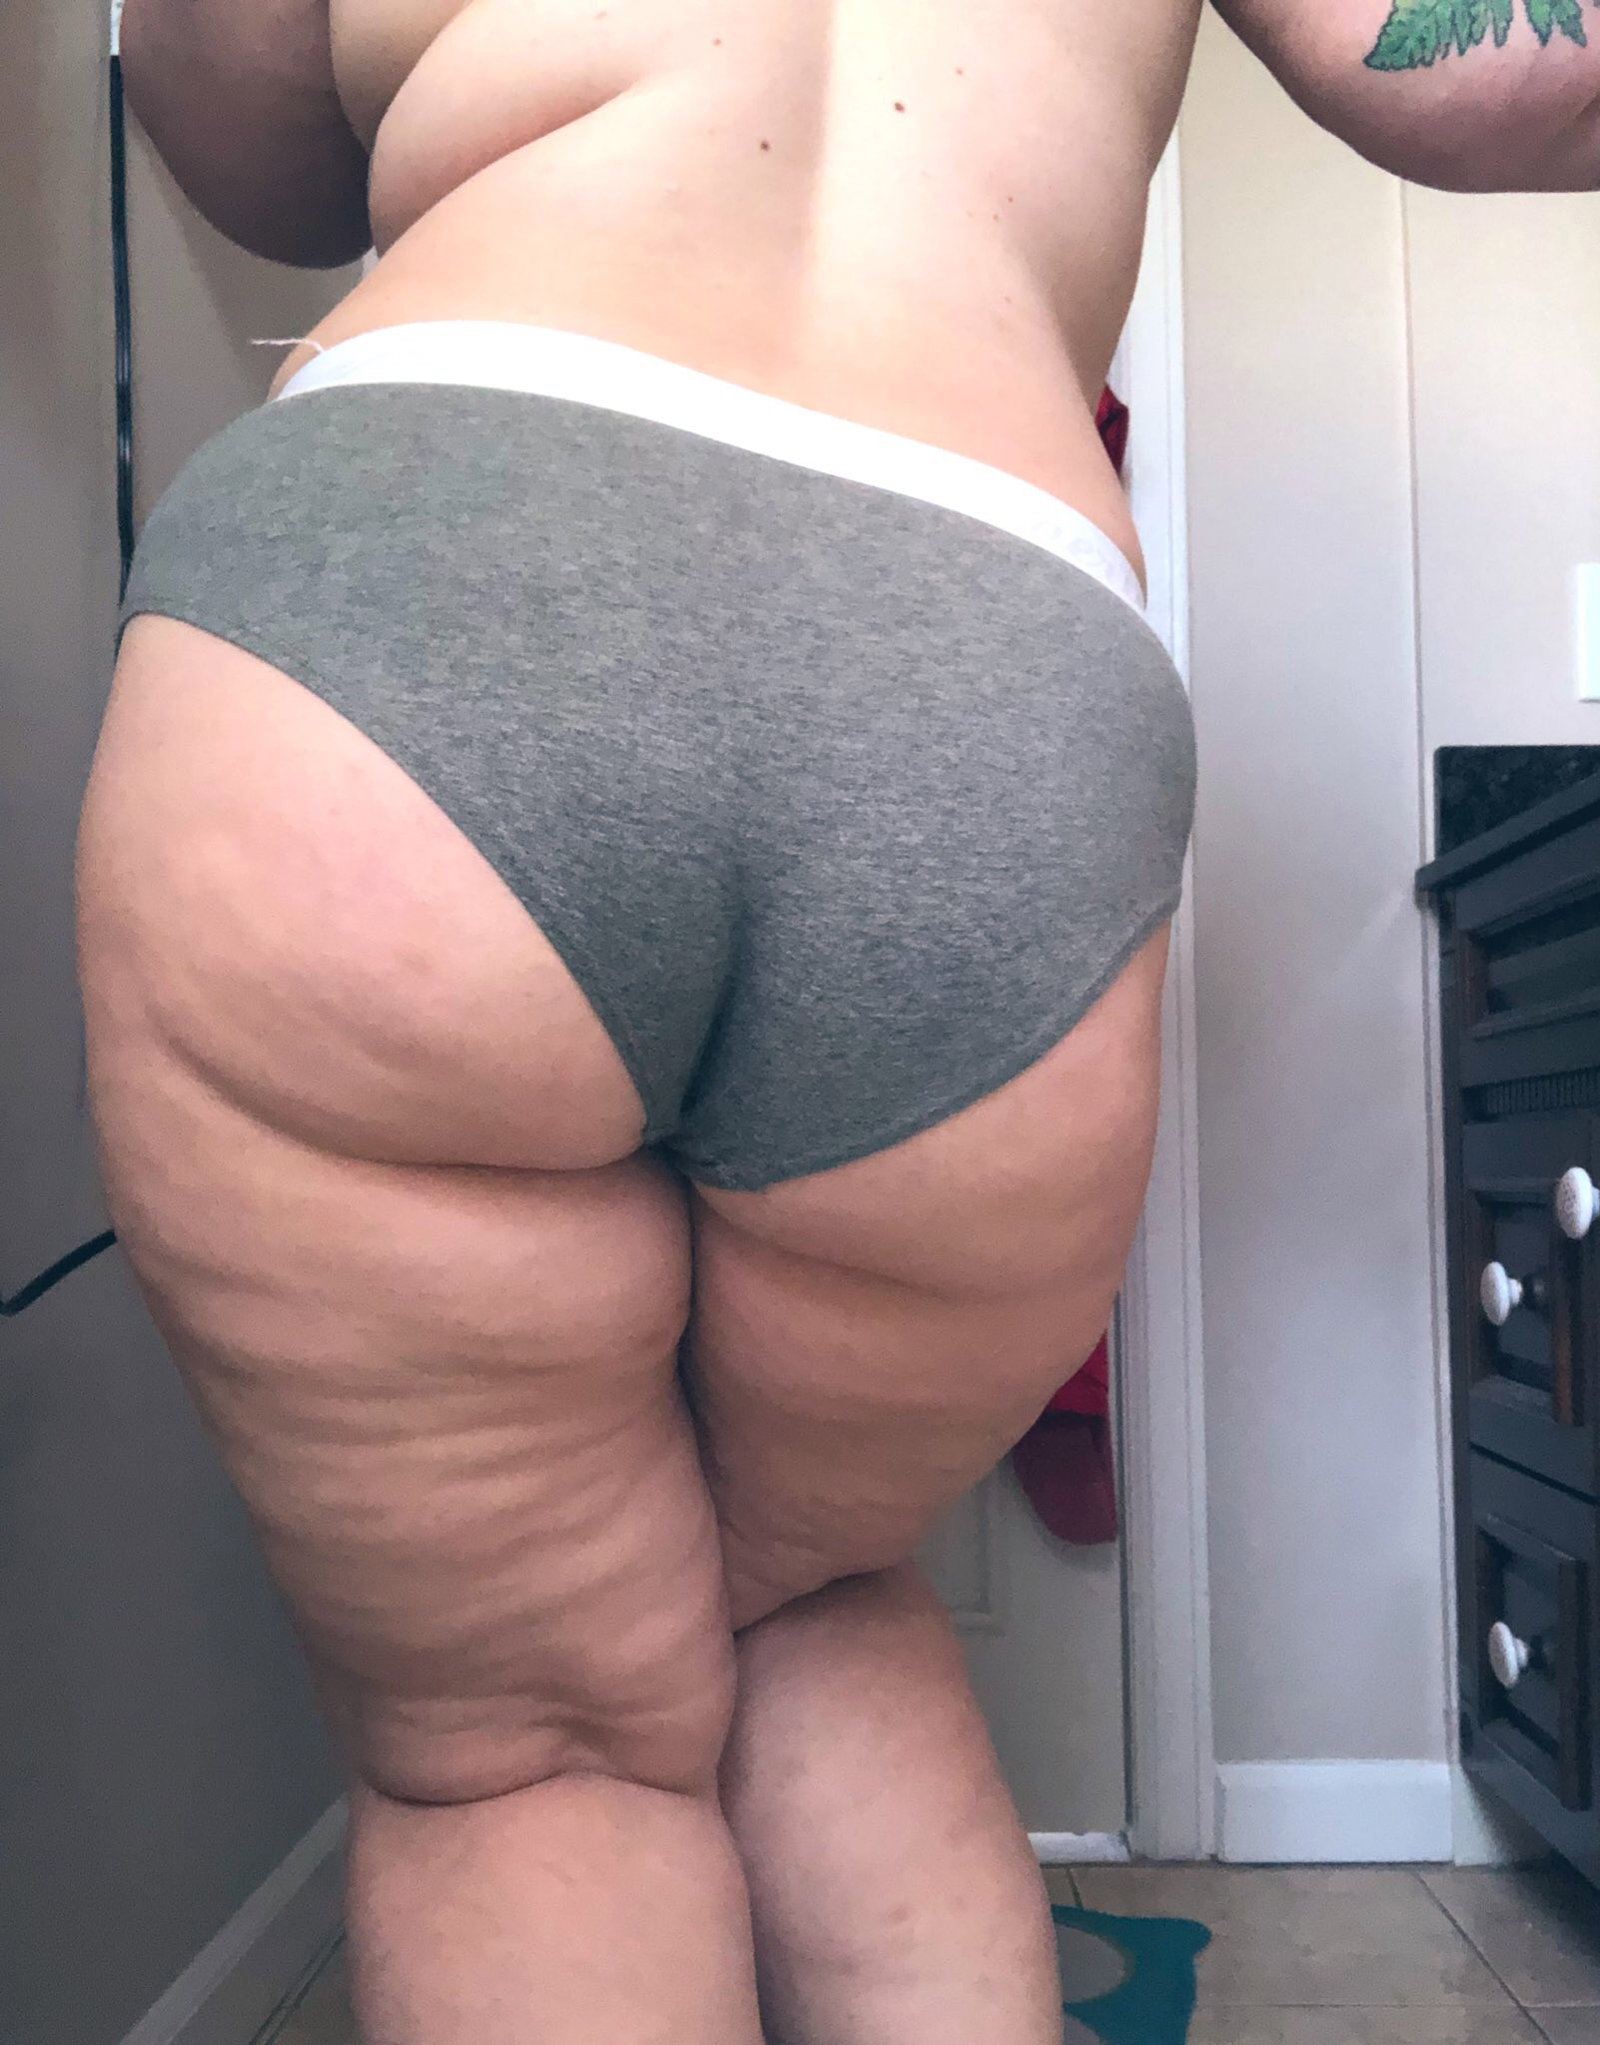 Watch the Photo by alizabethedw with the username @alizabethedw, who is a star user, posted on October 26, 2019. The post is about the topic BBW. and the text says 'This is a flawless ass. Any questions? 😏'